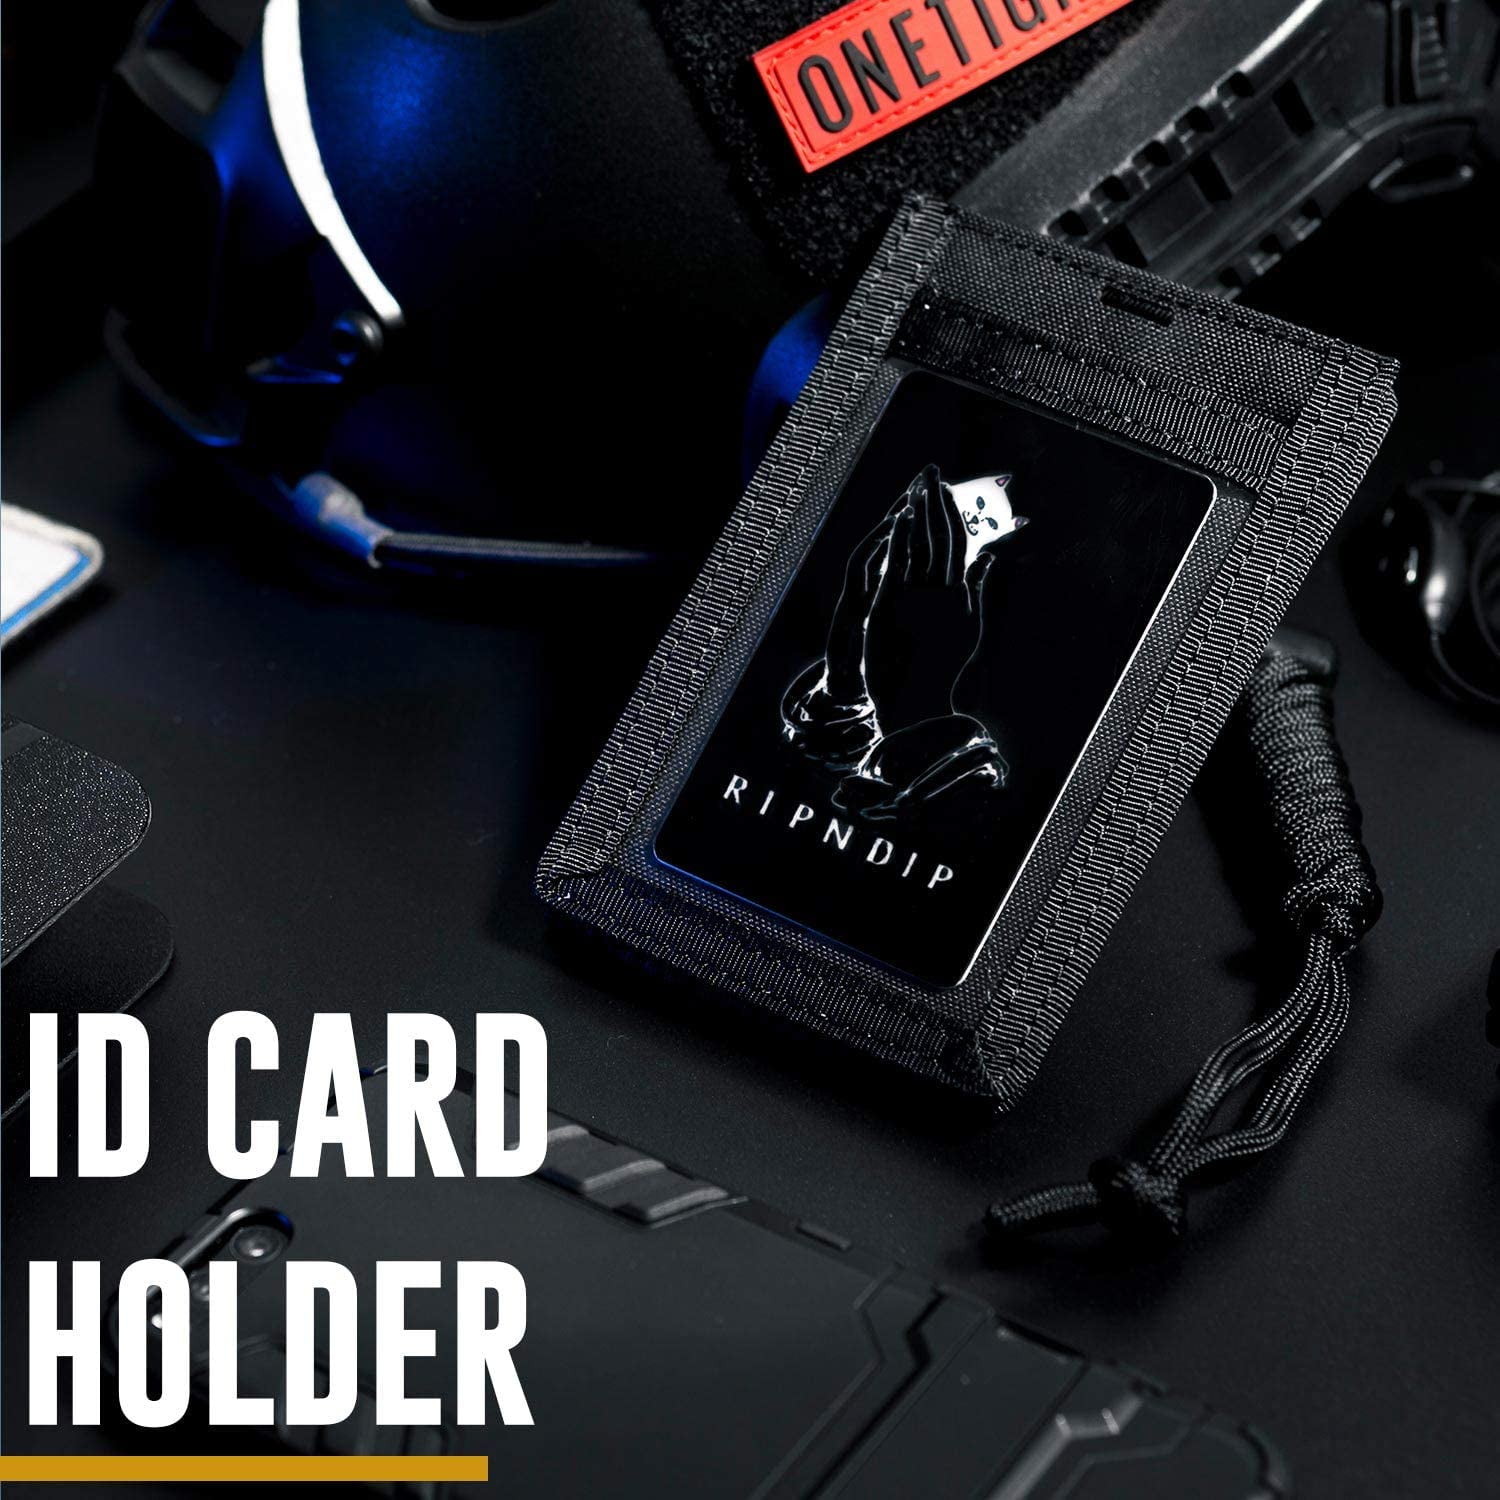 Tactical ID Card Holder Organizer Hook & Loop Pouch with Neck Lanyard Key Ring 